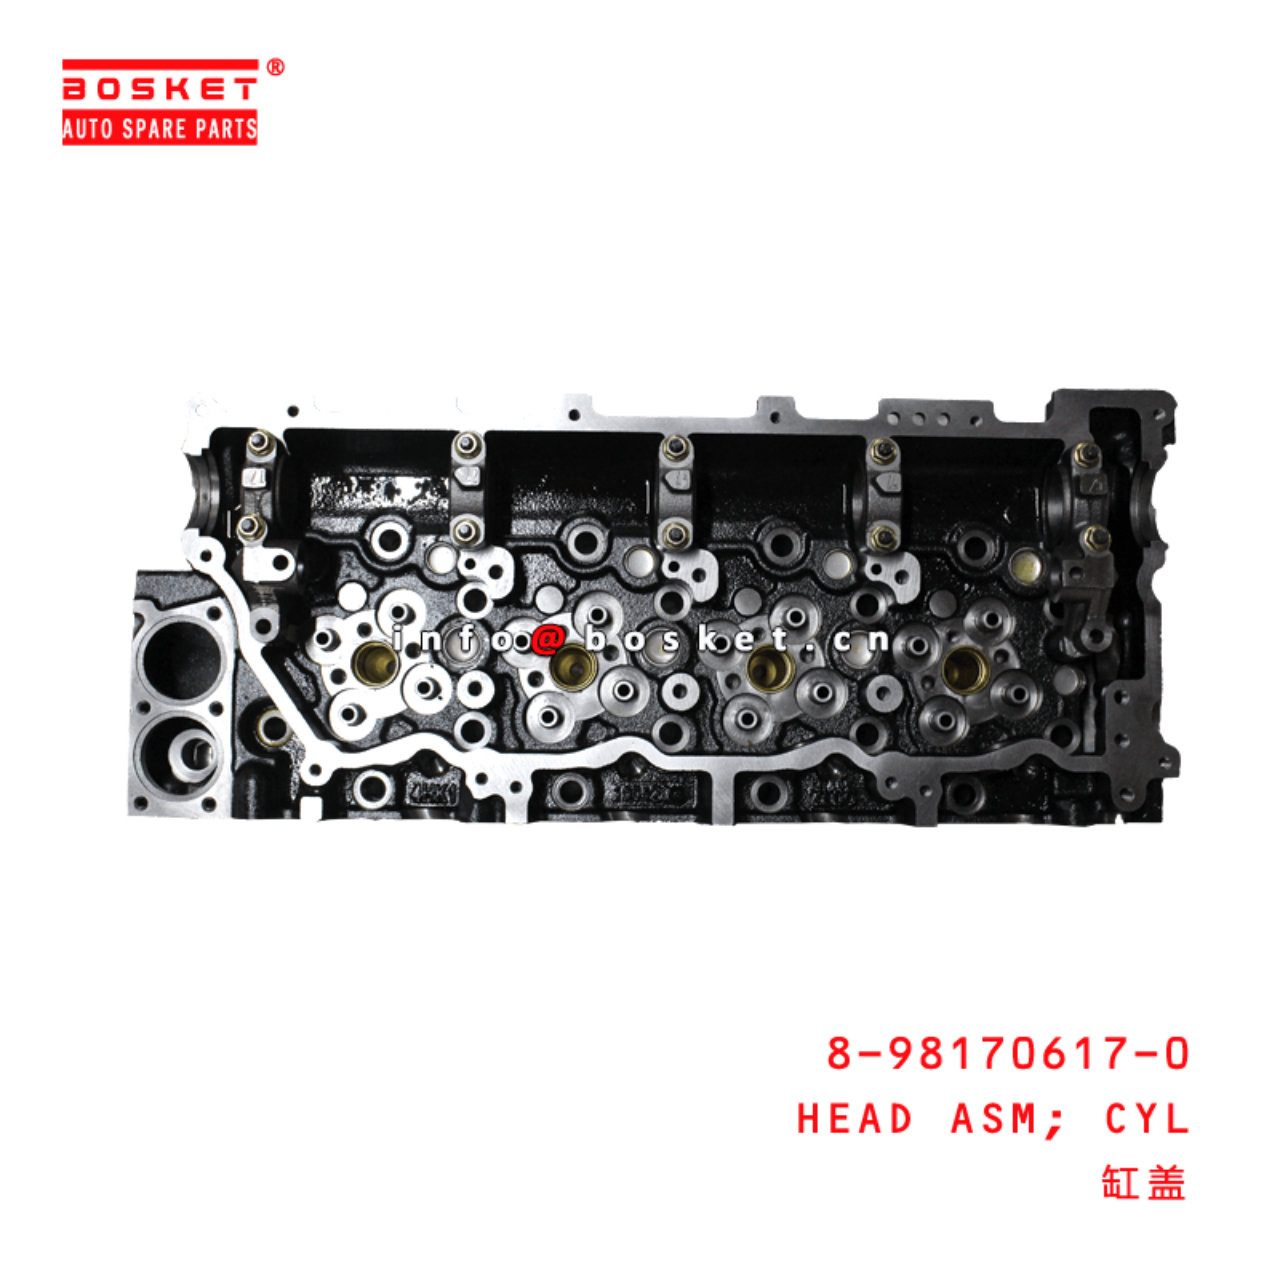  8-98170617-0 Cylinder Head Assembly 8981706170 Suitable for ISUZU 700P NPR75 NQR75 4HK1T